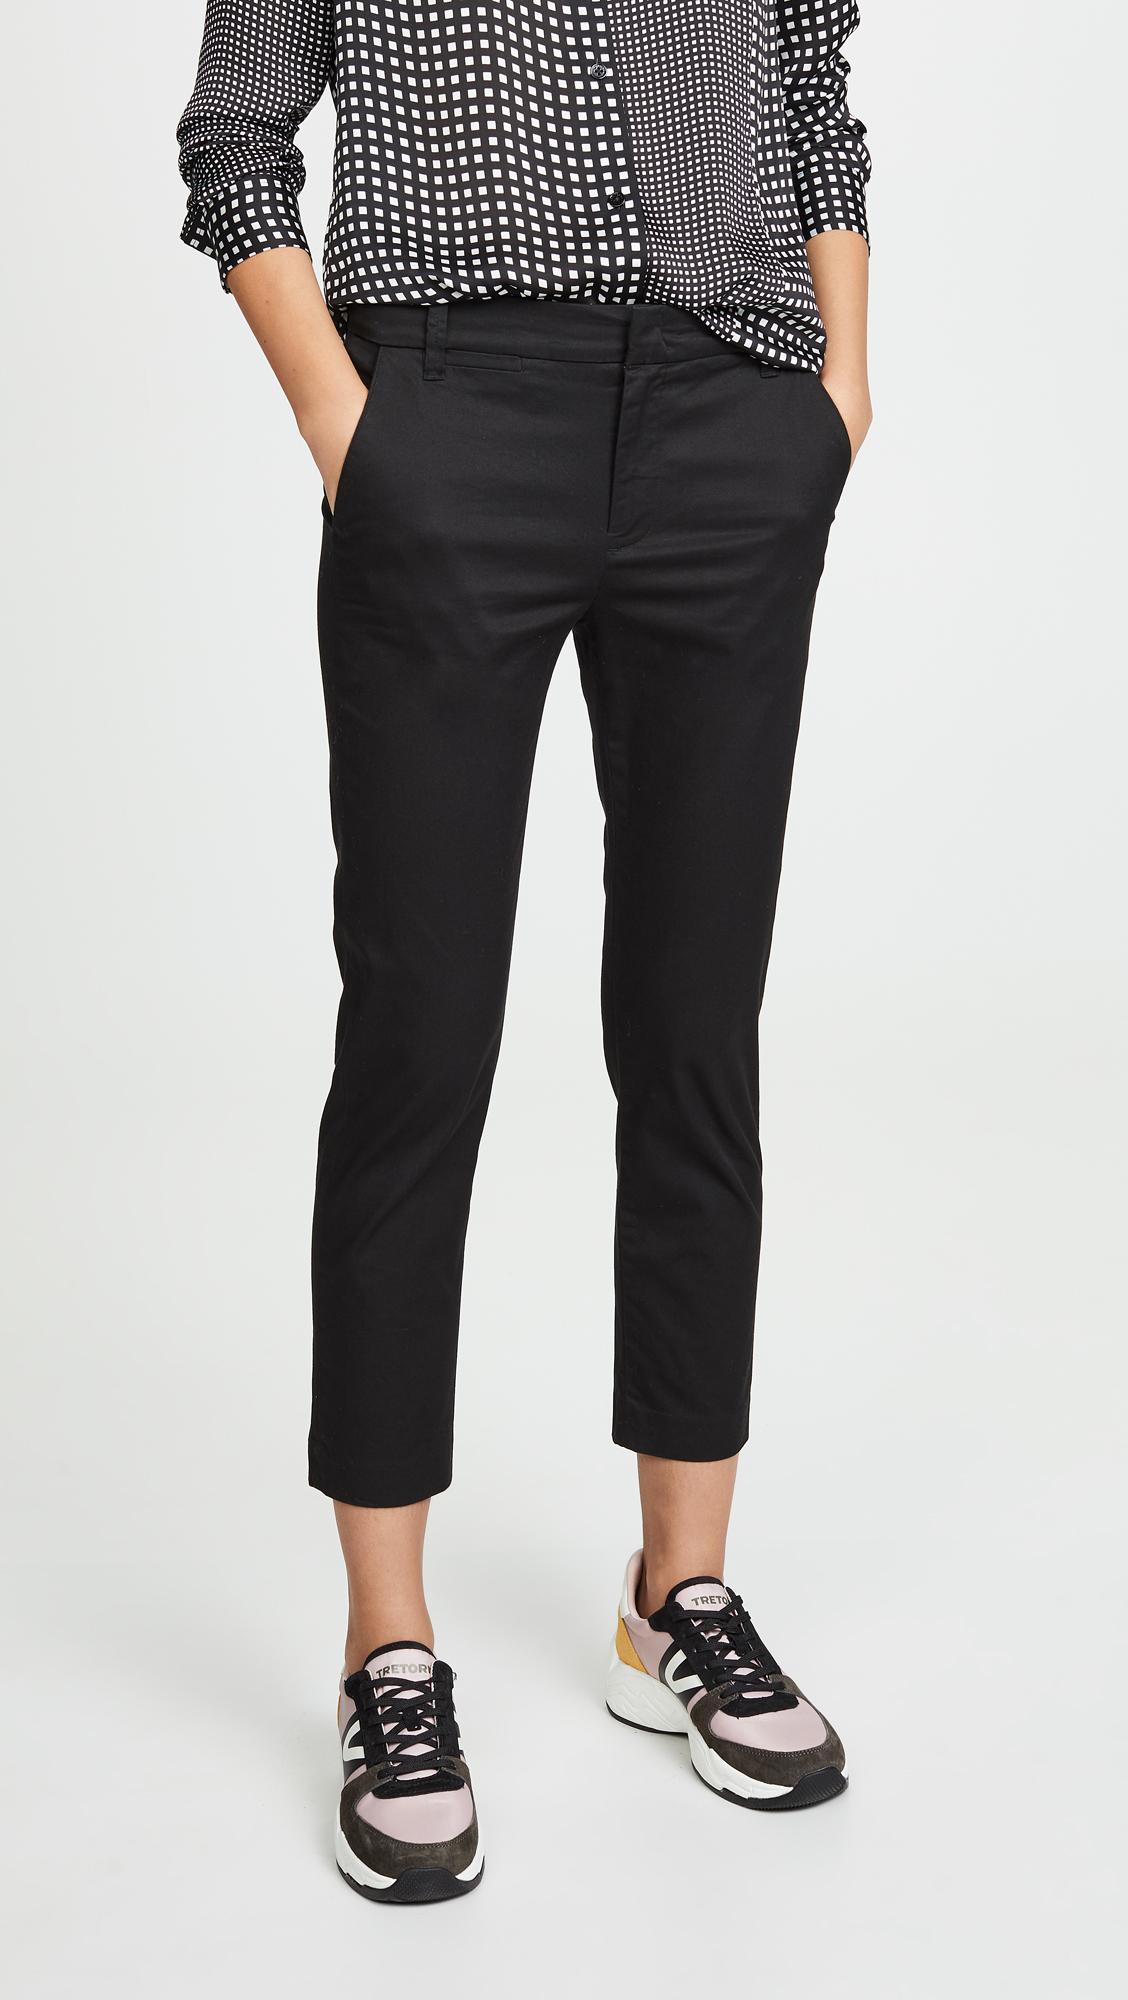 Vince Cotton Coin Pocket Chino Pants in Black - Lyst